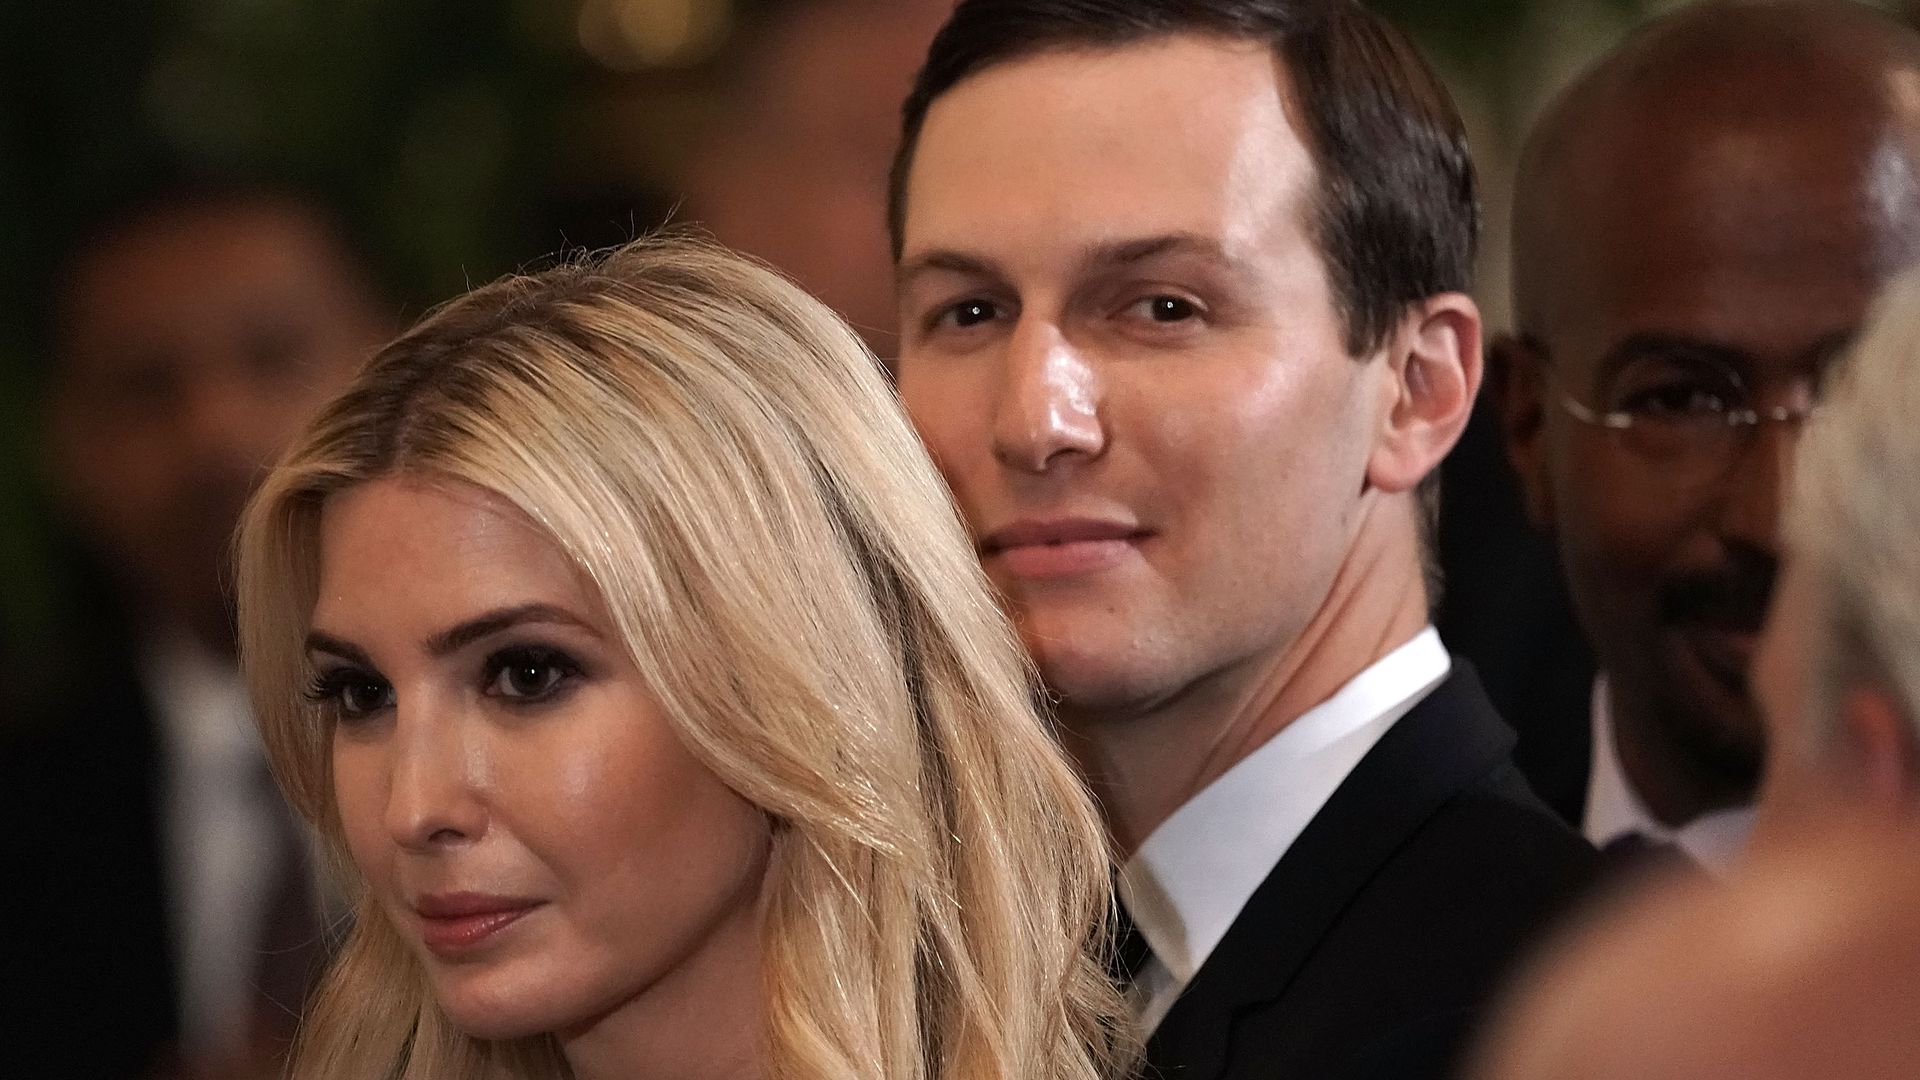 Ivanka Trump and Jared Kushner sitting next to each other at an event